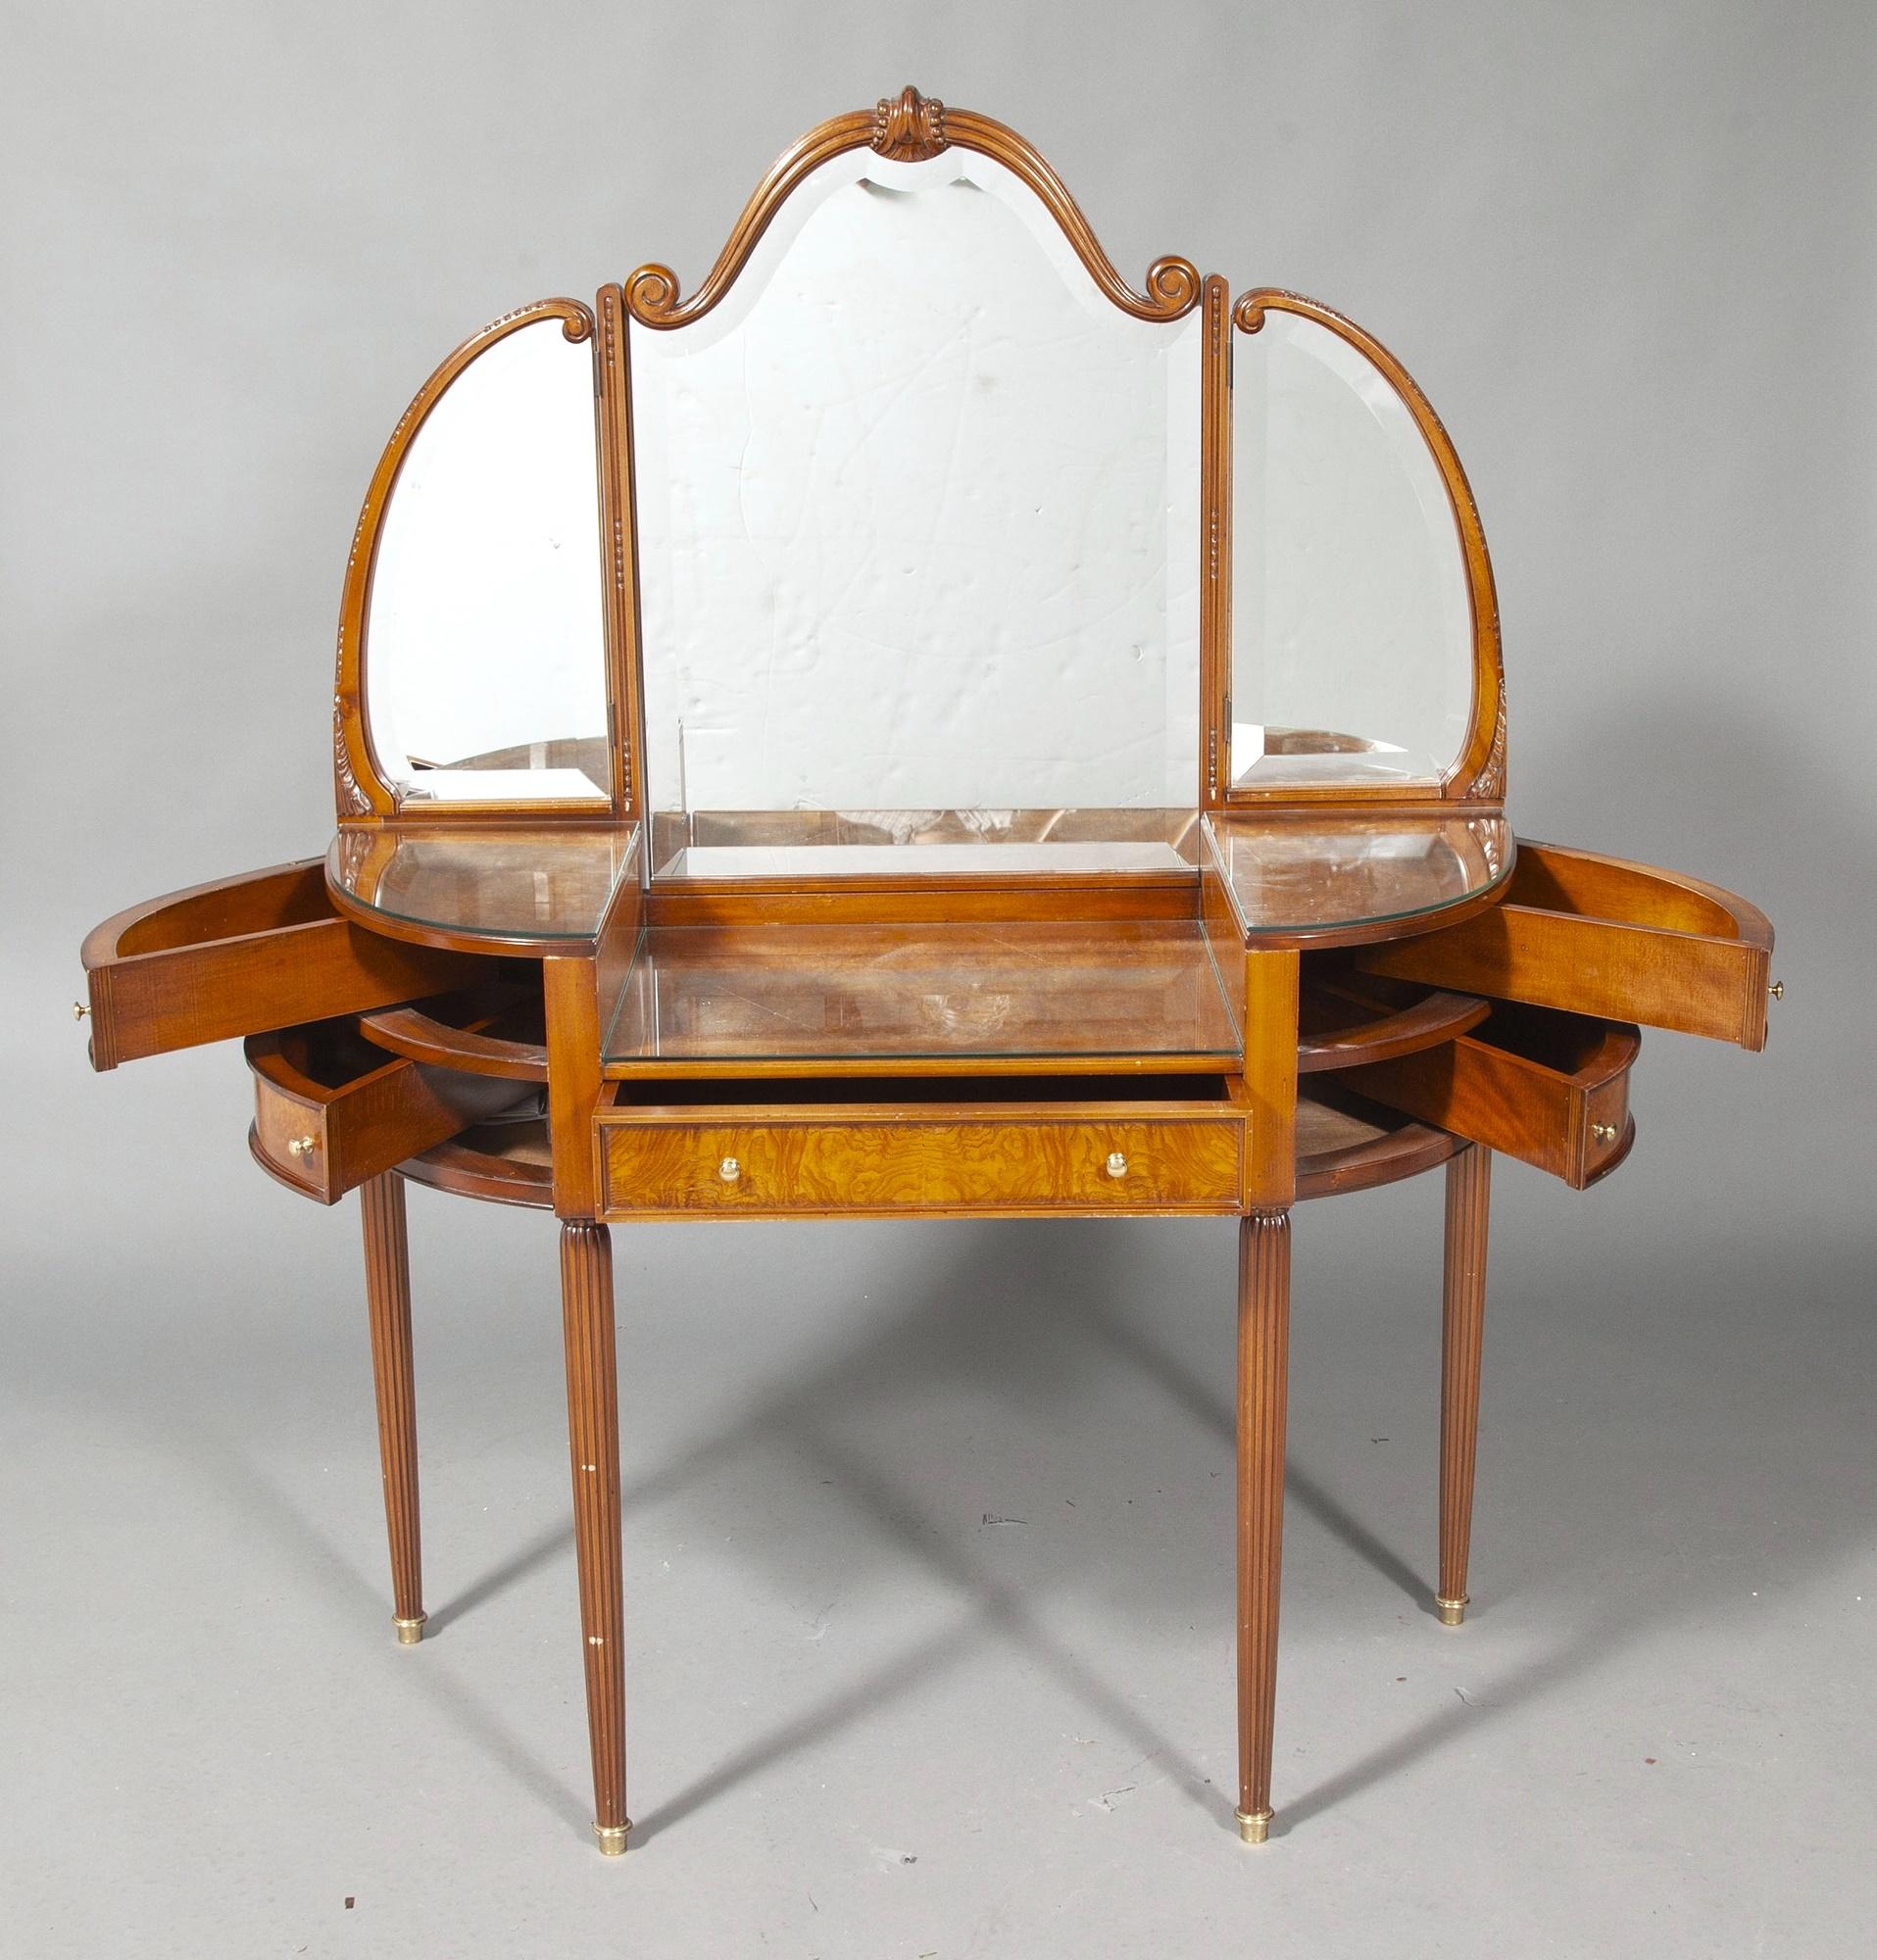 Hand-Carved Italian Edwardian Style Walnut Vanity Dressing Table With Chair For Sale